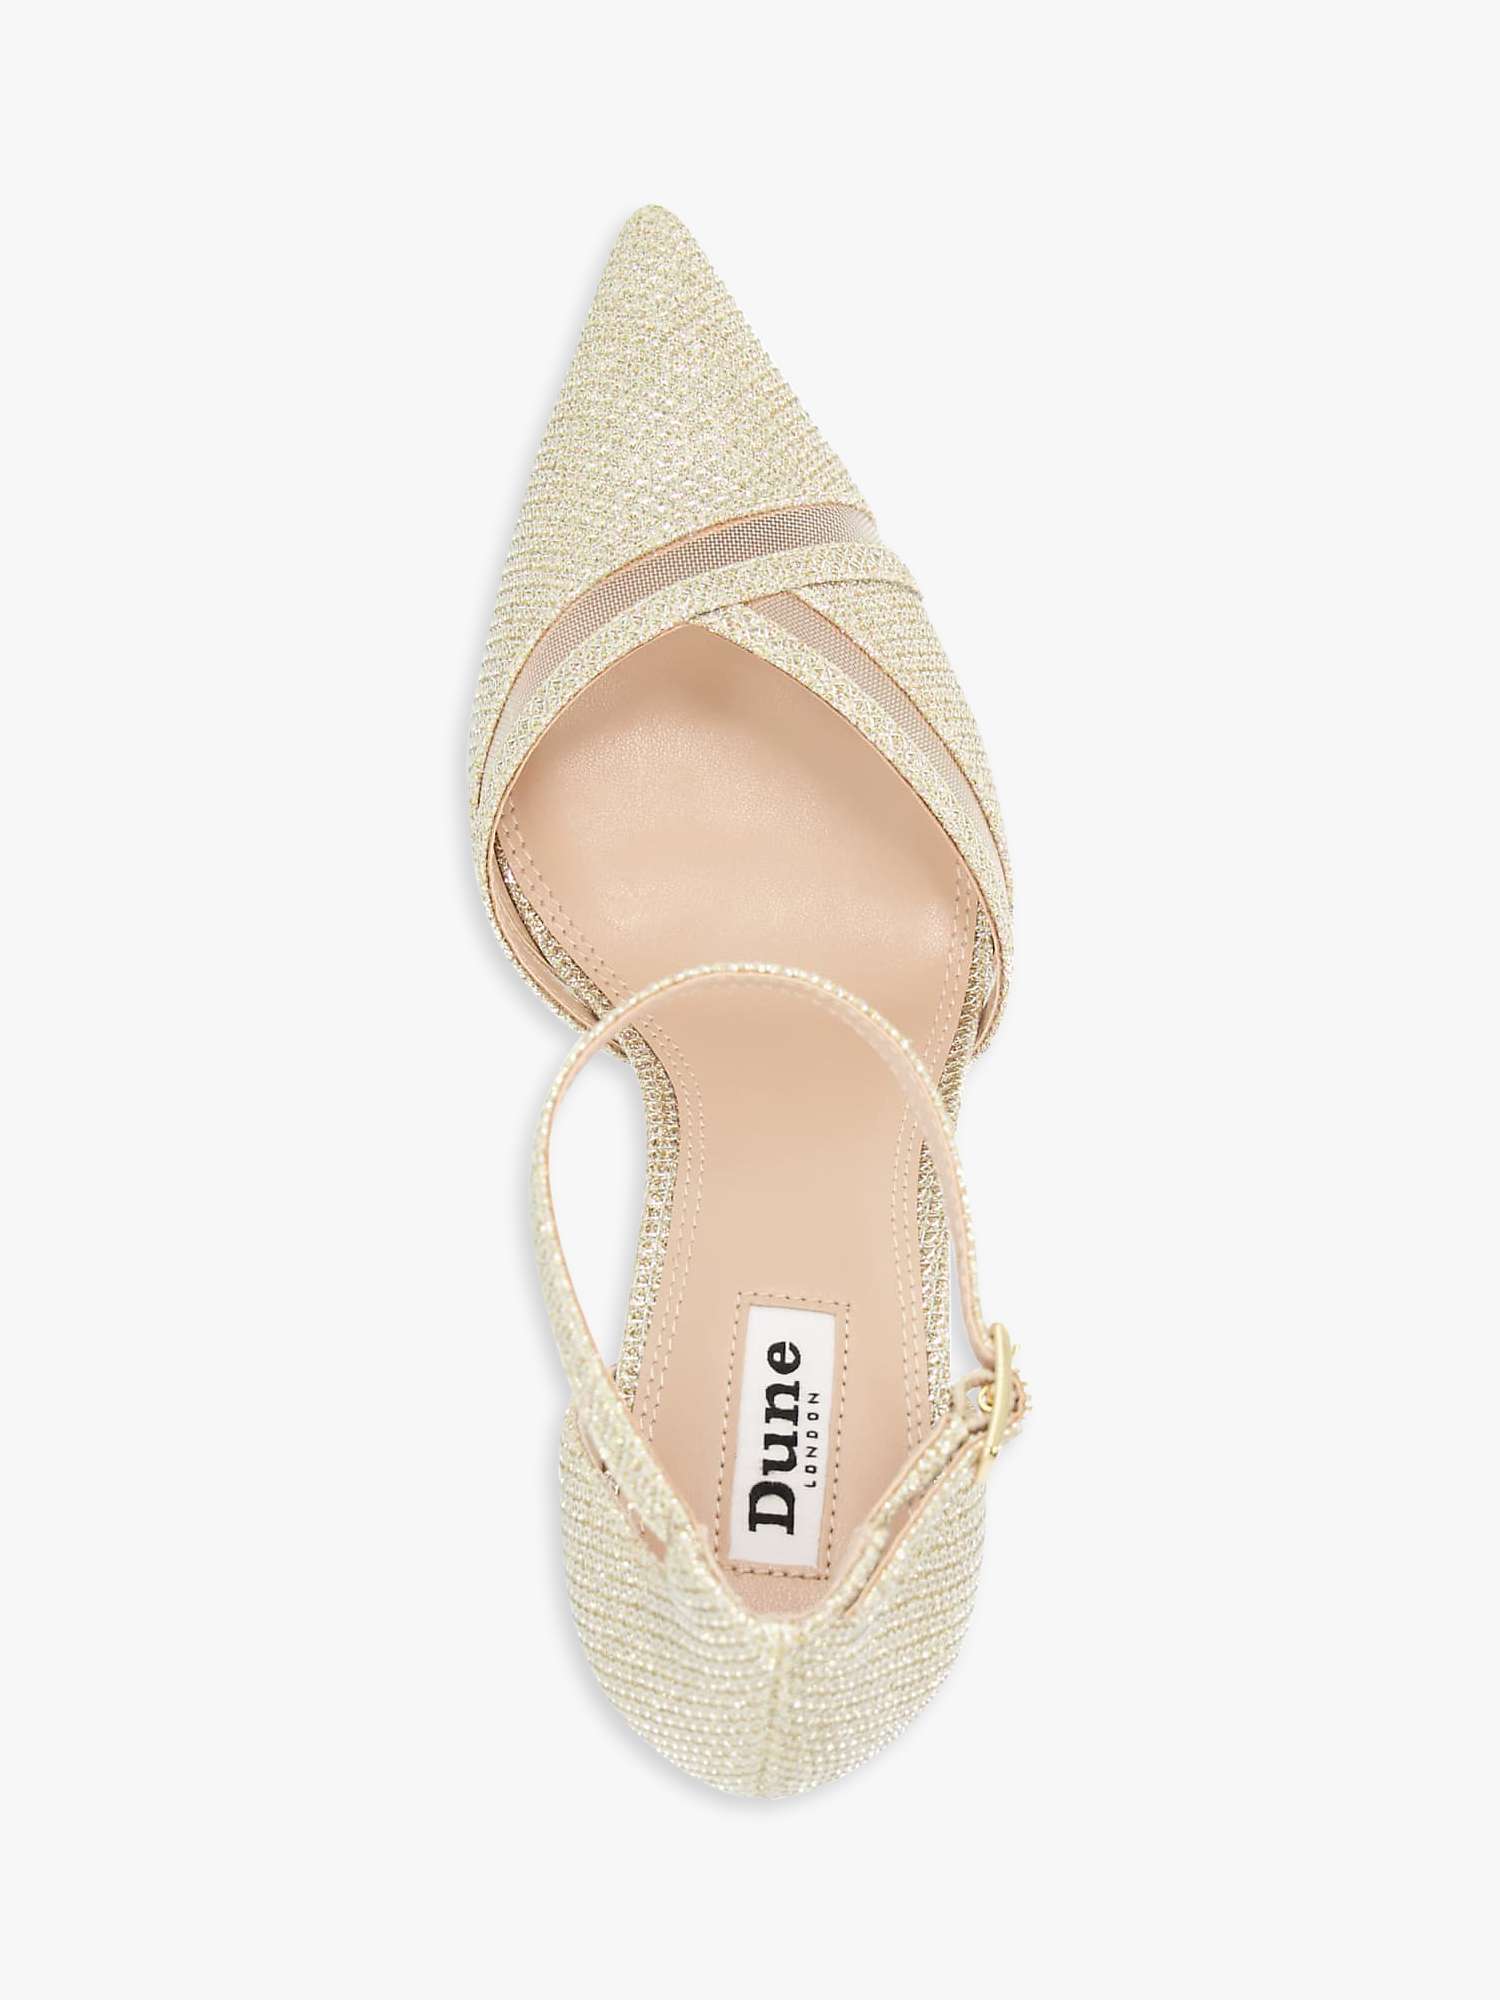 Dune Deaner Two Part High Heel Court Shoes, Gold at John Lewis & Partners